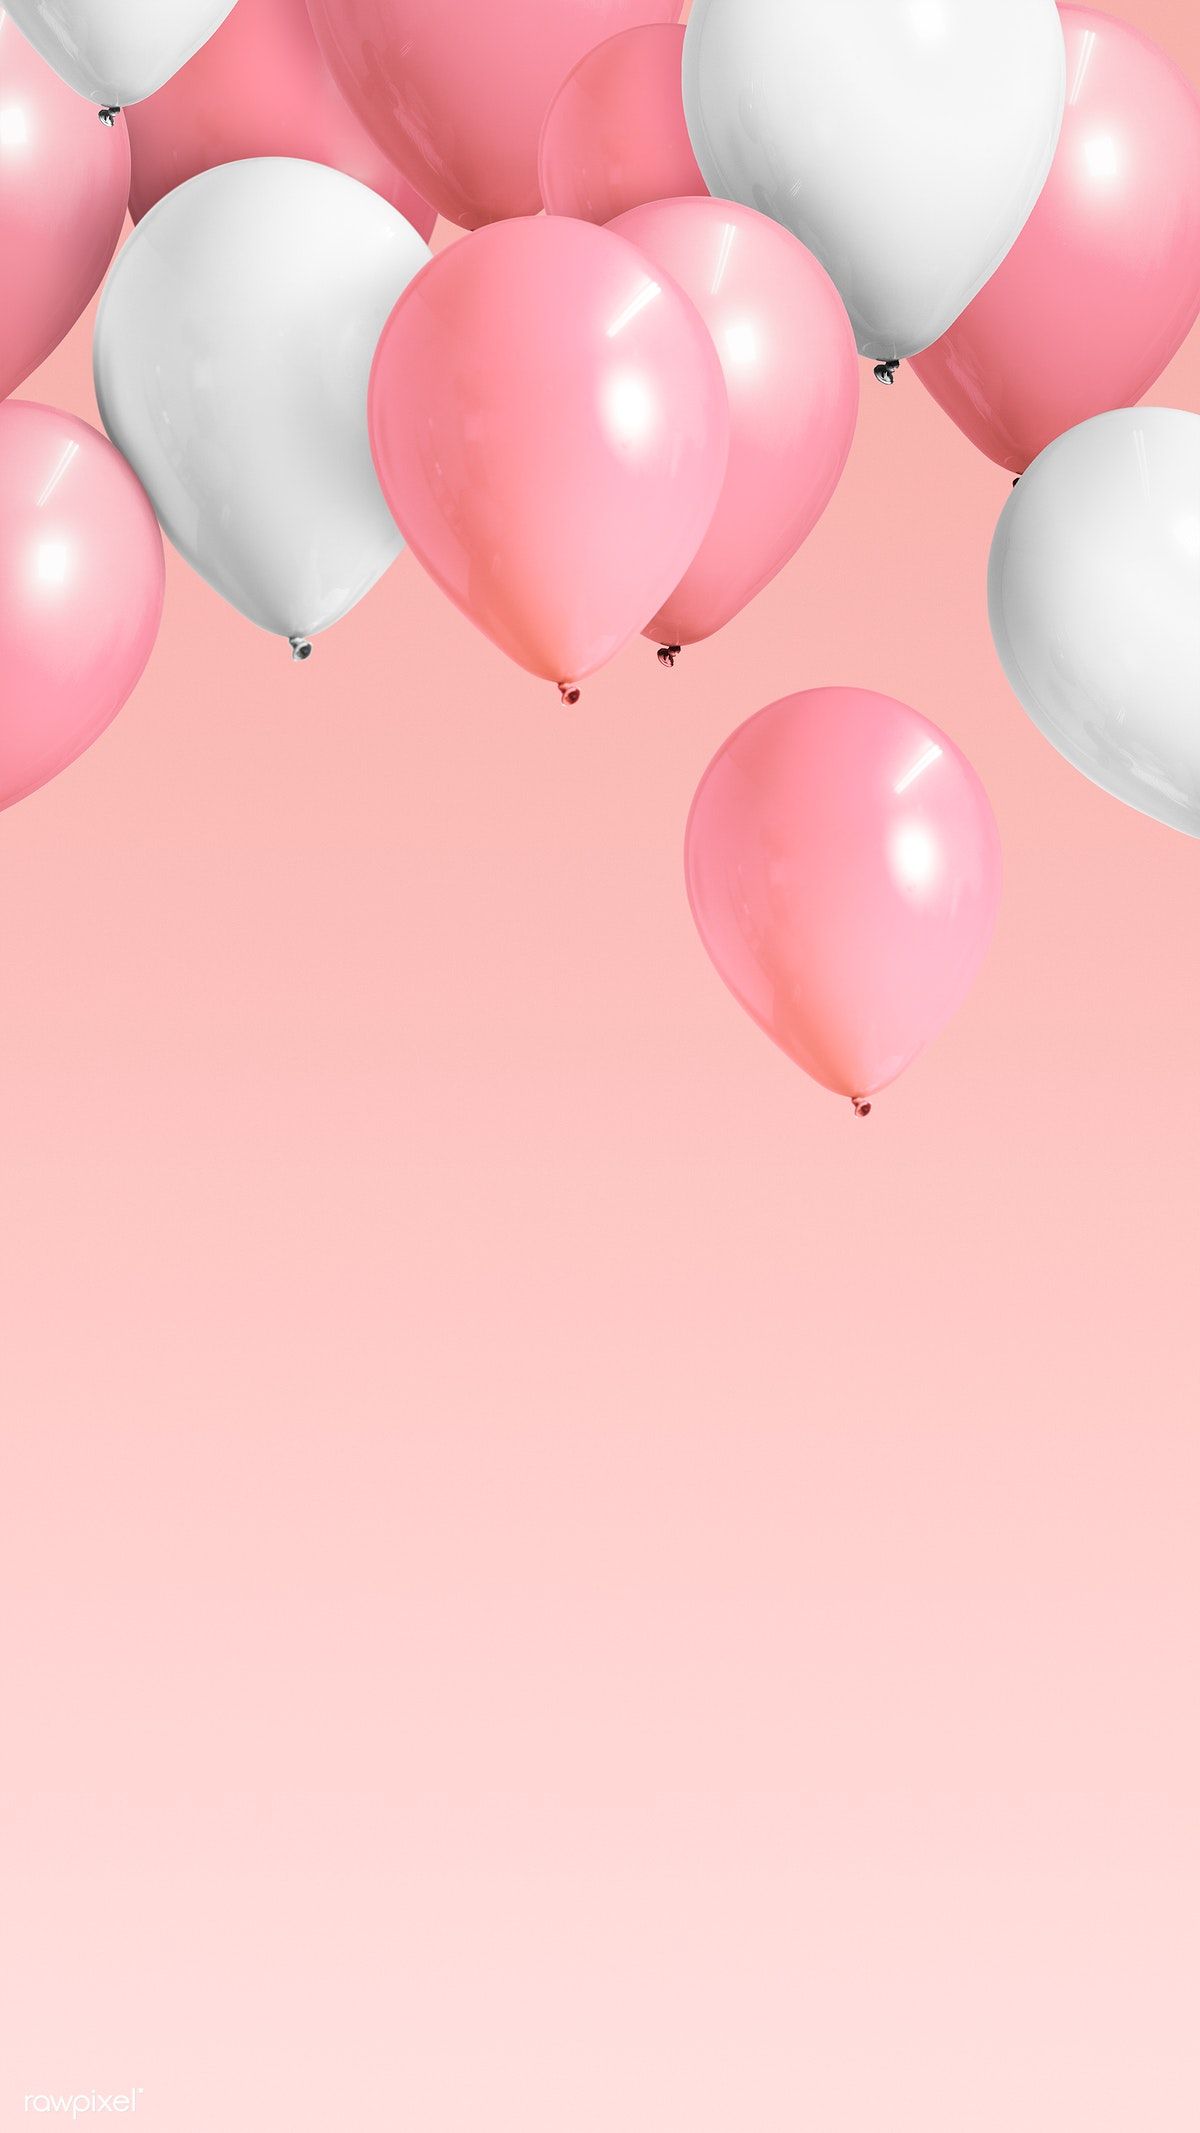 Download premium psd of Pink and white balloons on a pink background - Balloons